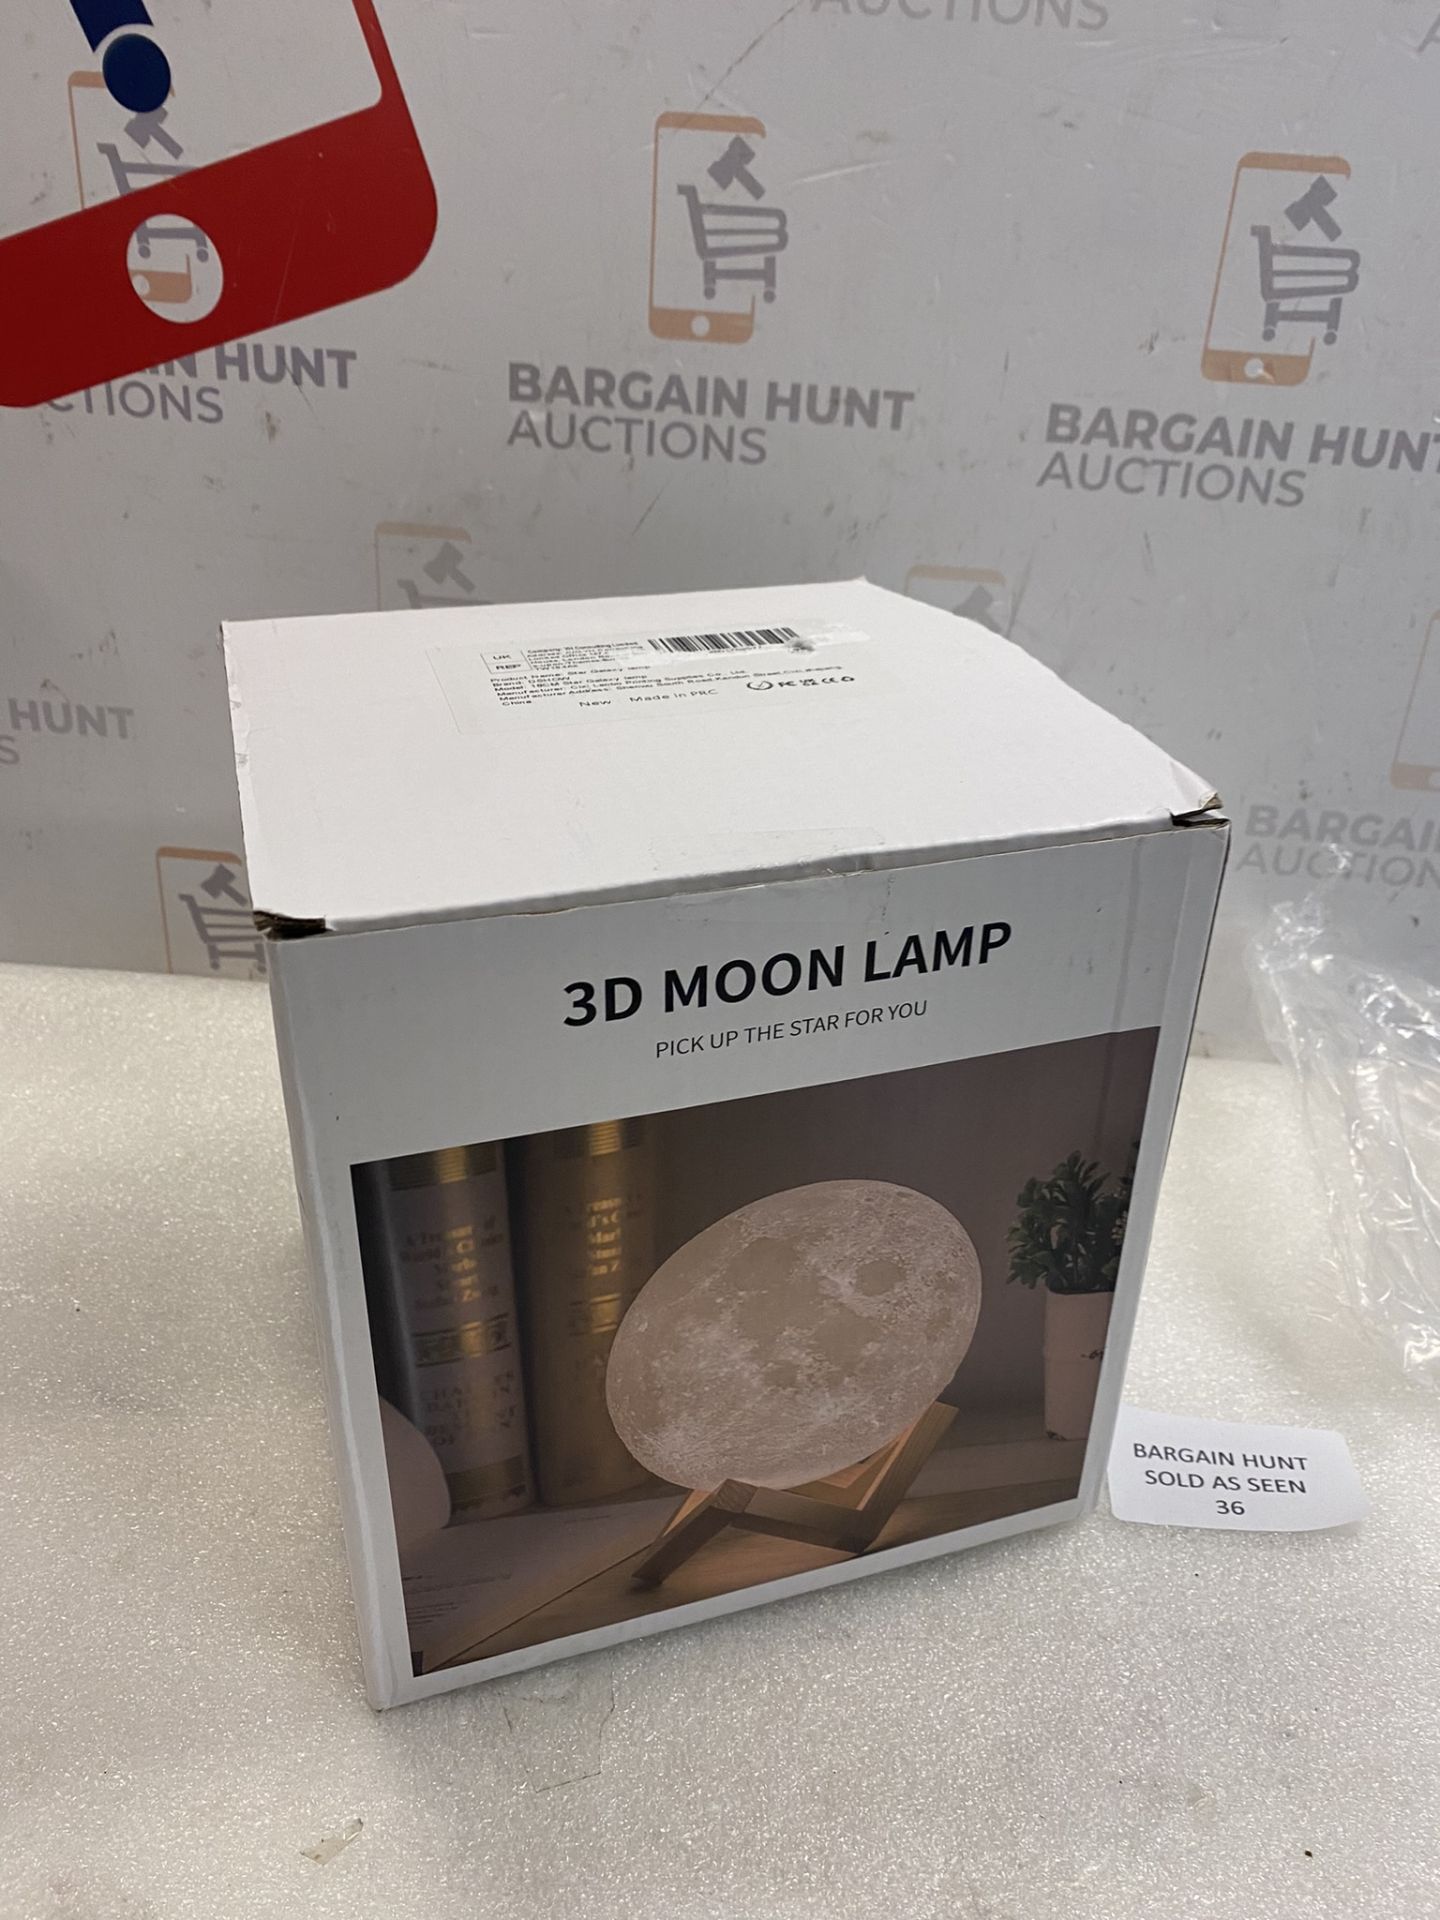 Moon Lamp Kids Night Light Galaxy Lamp 7.1" 16 Colours LED 3D Remote Control Lamp - Image 2 of 2